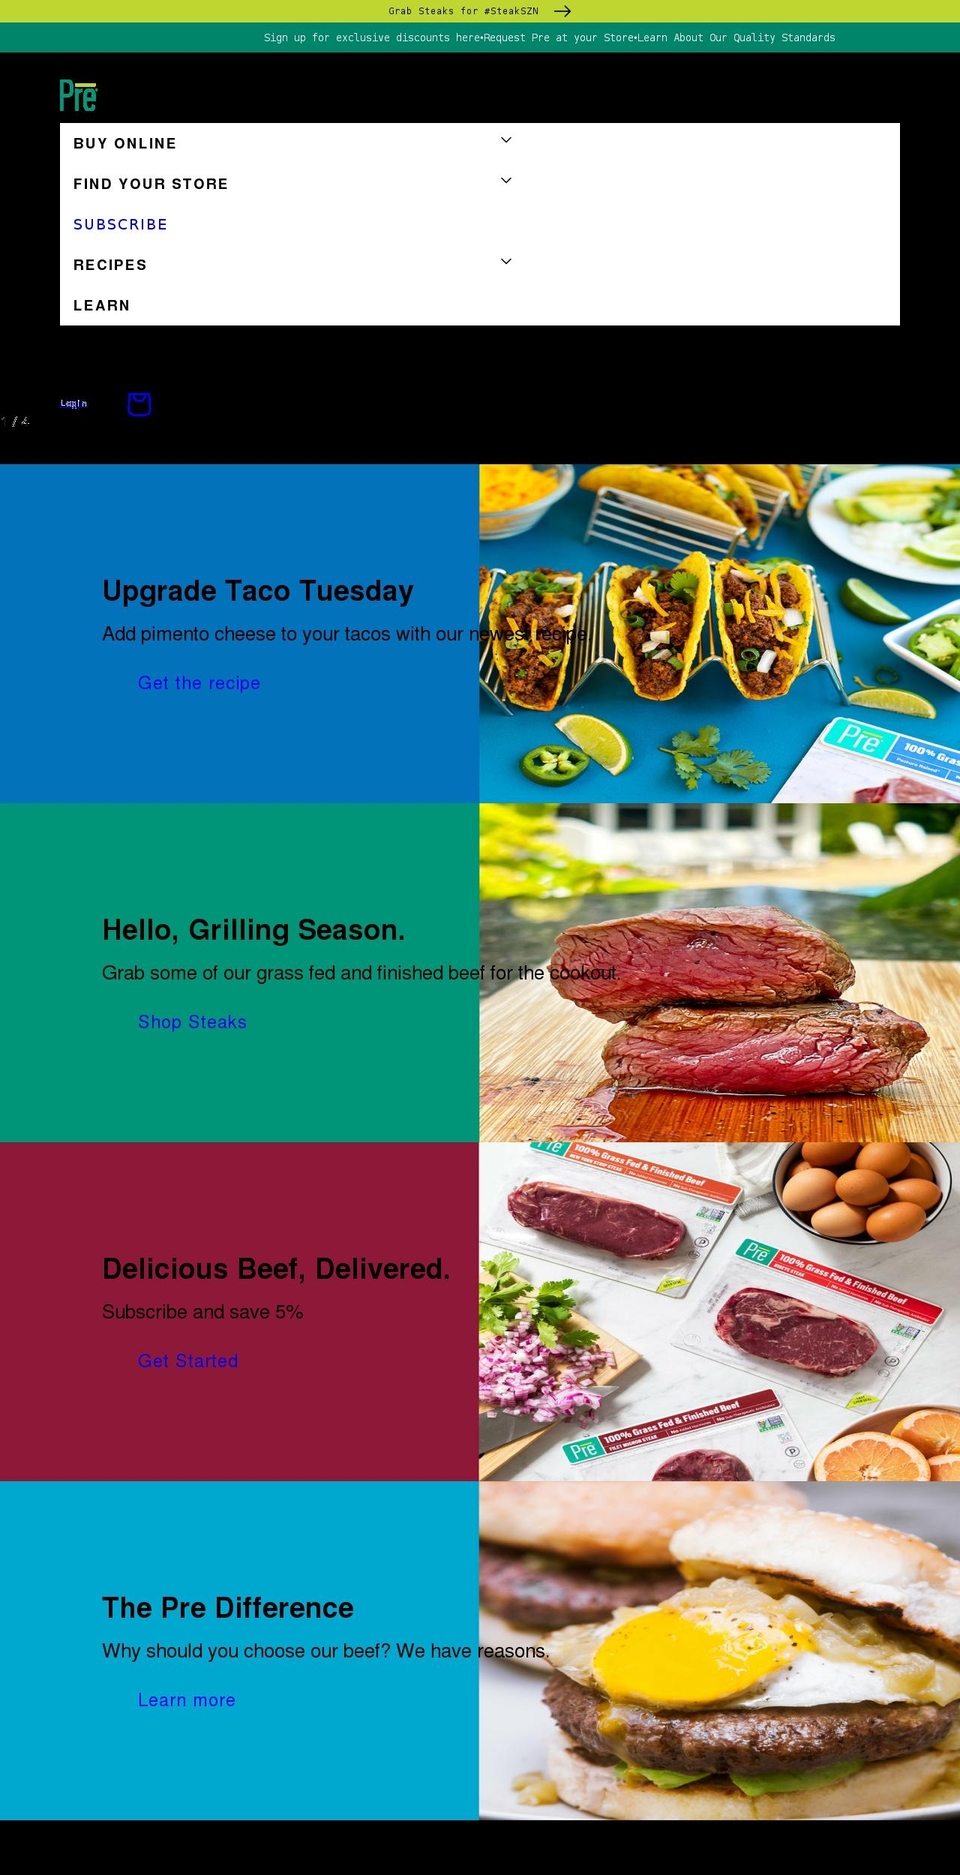 Updated Checkout Shopify theme site example eatpre.com